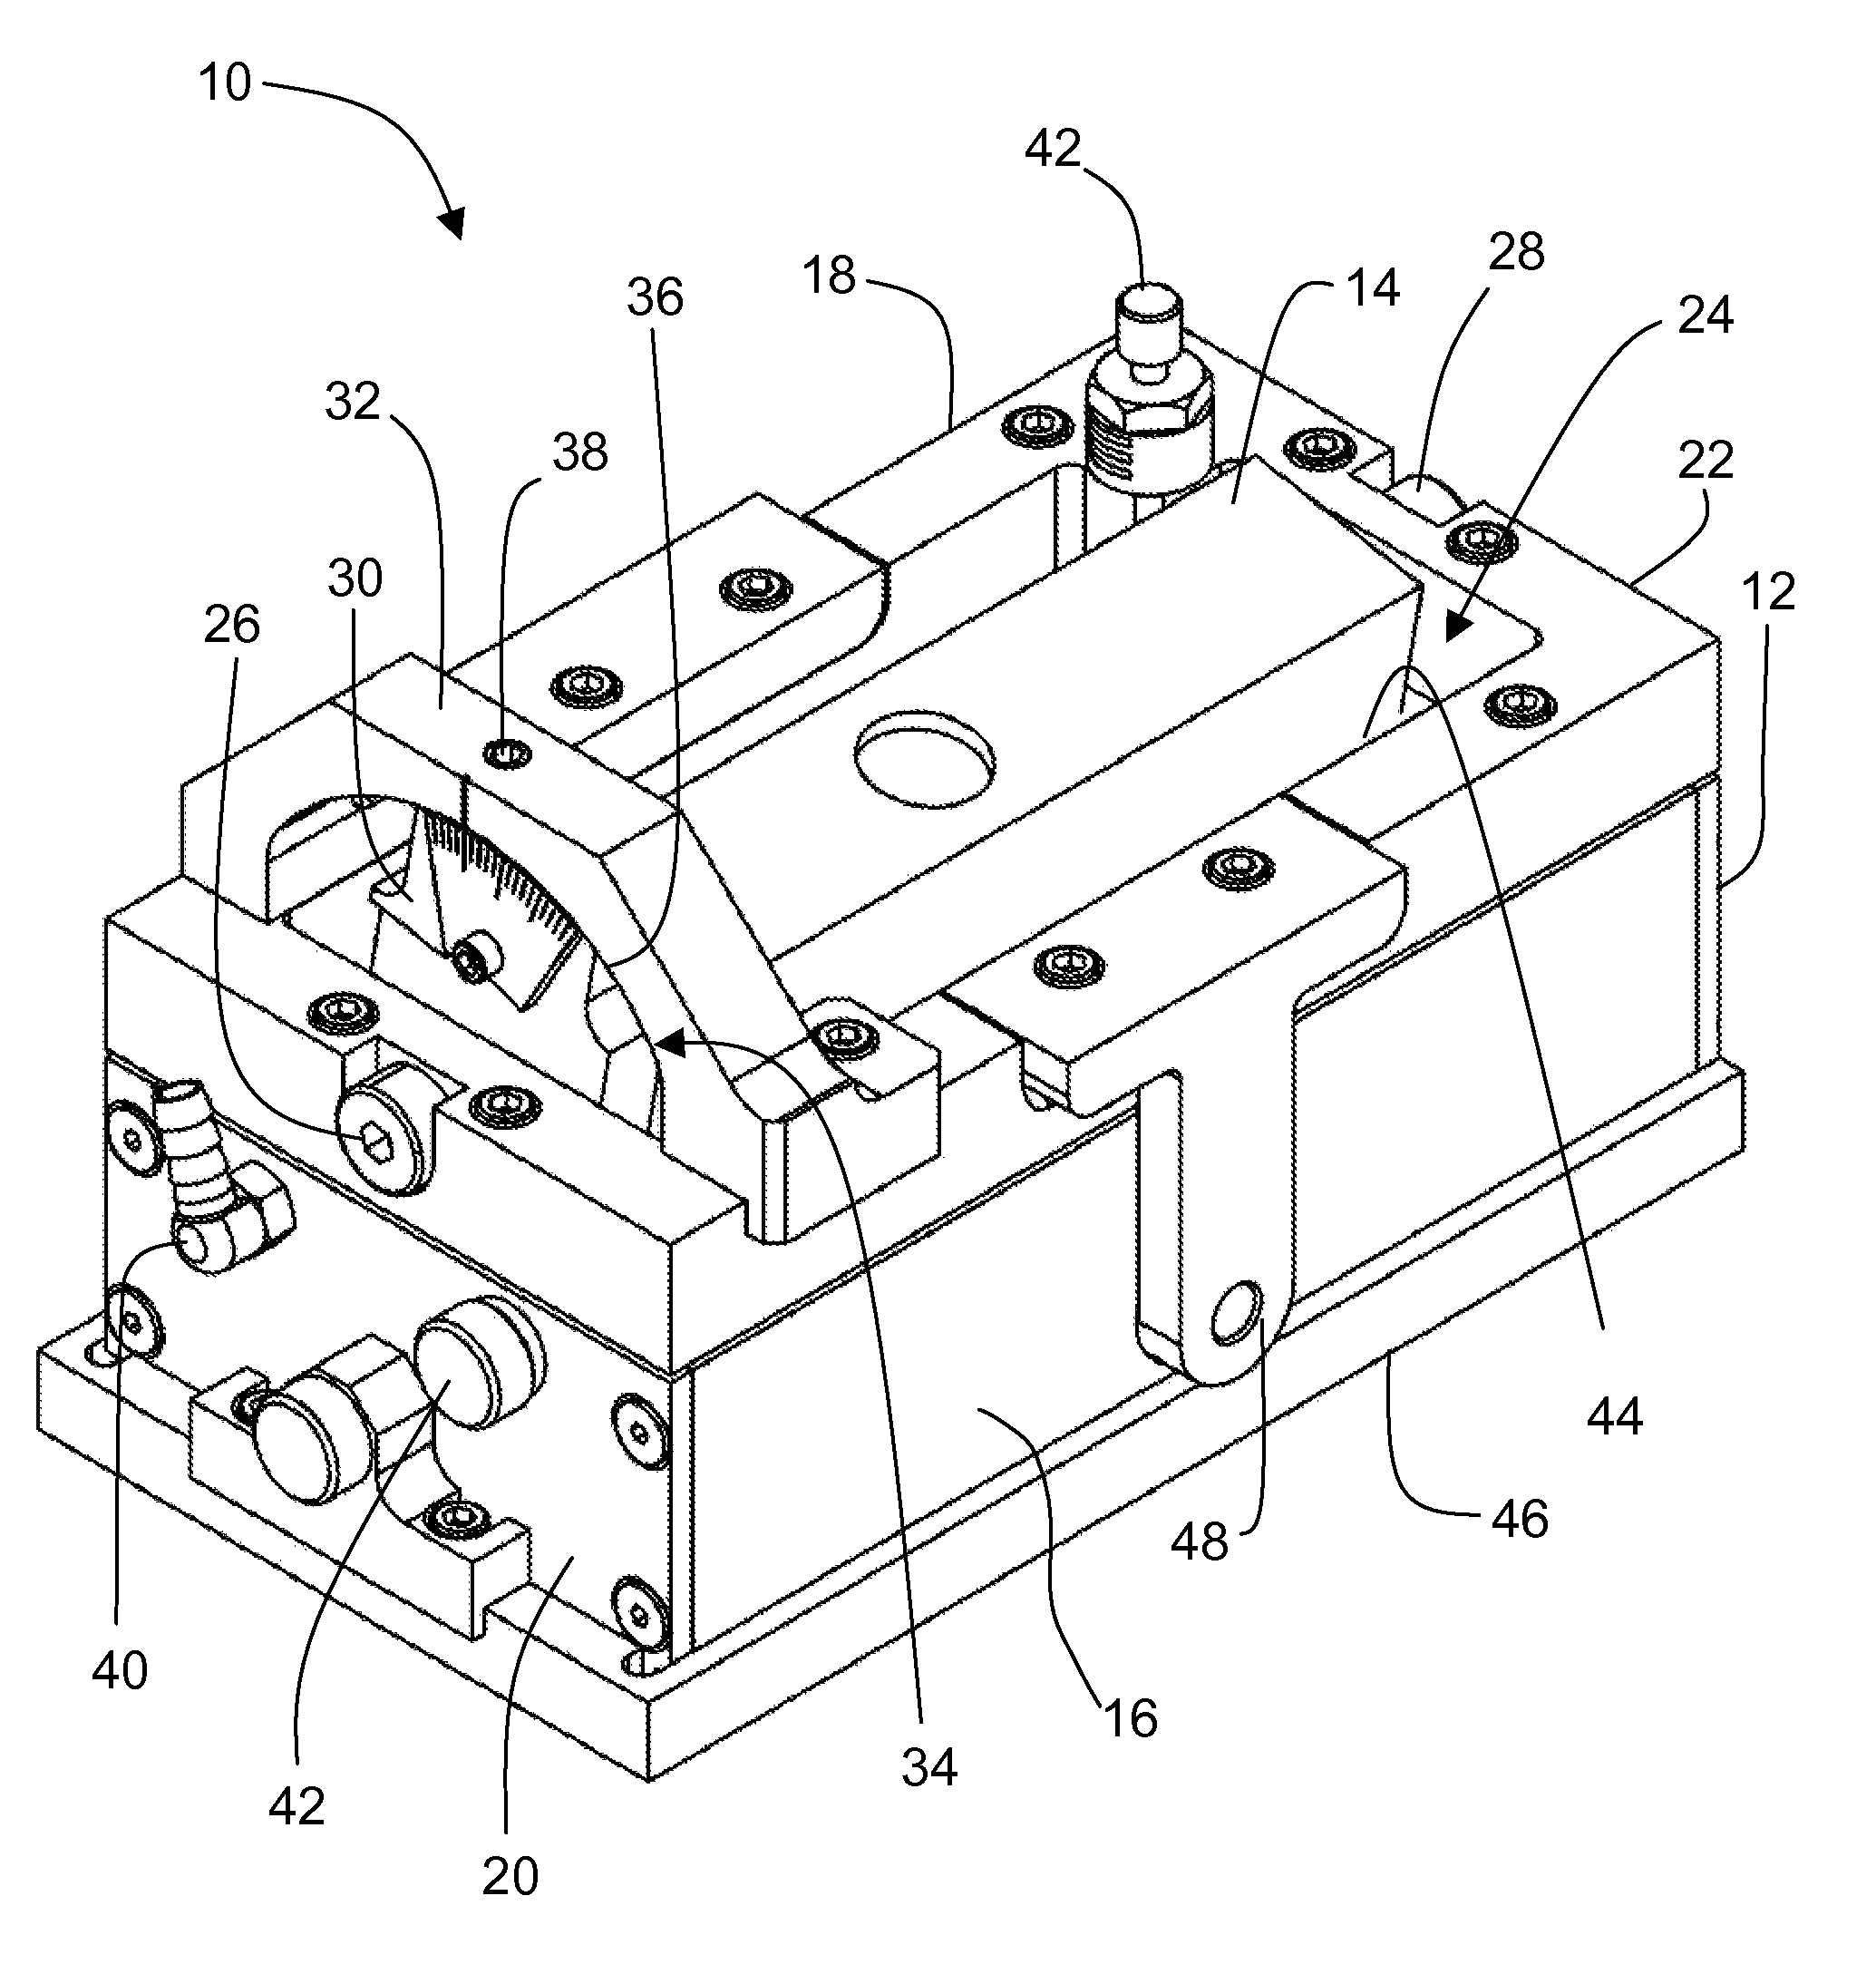 Phased array ultrasonic water wedge apparatus